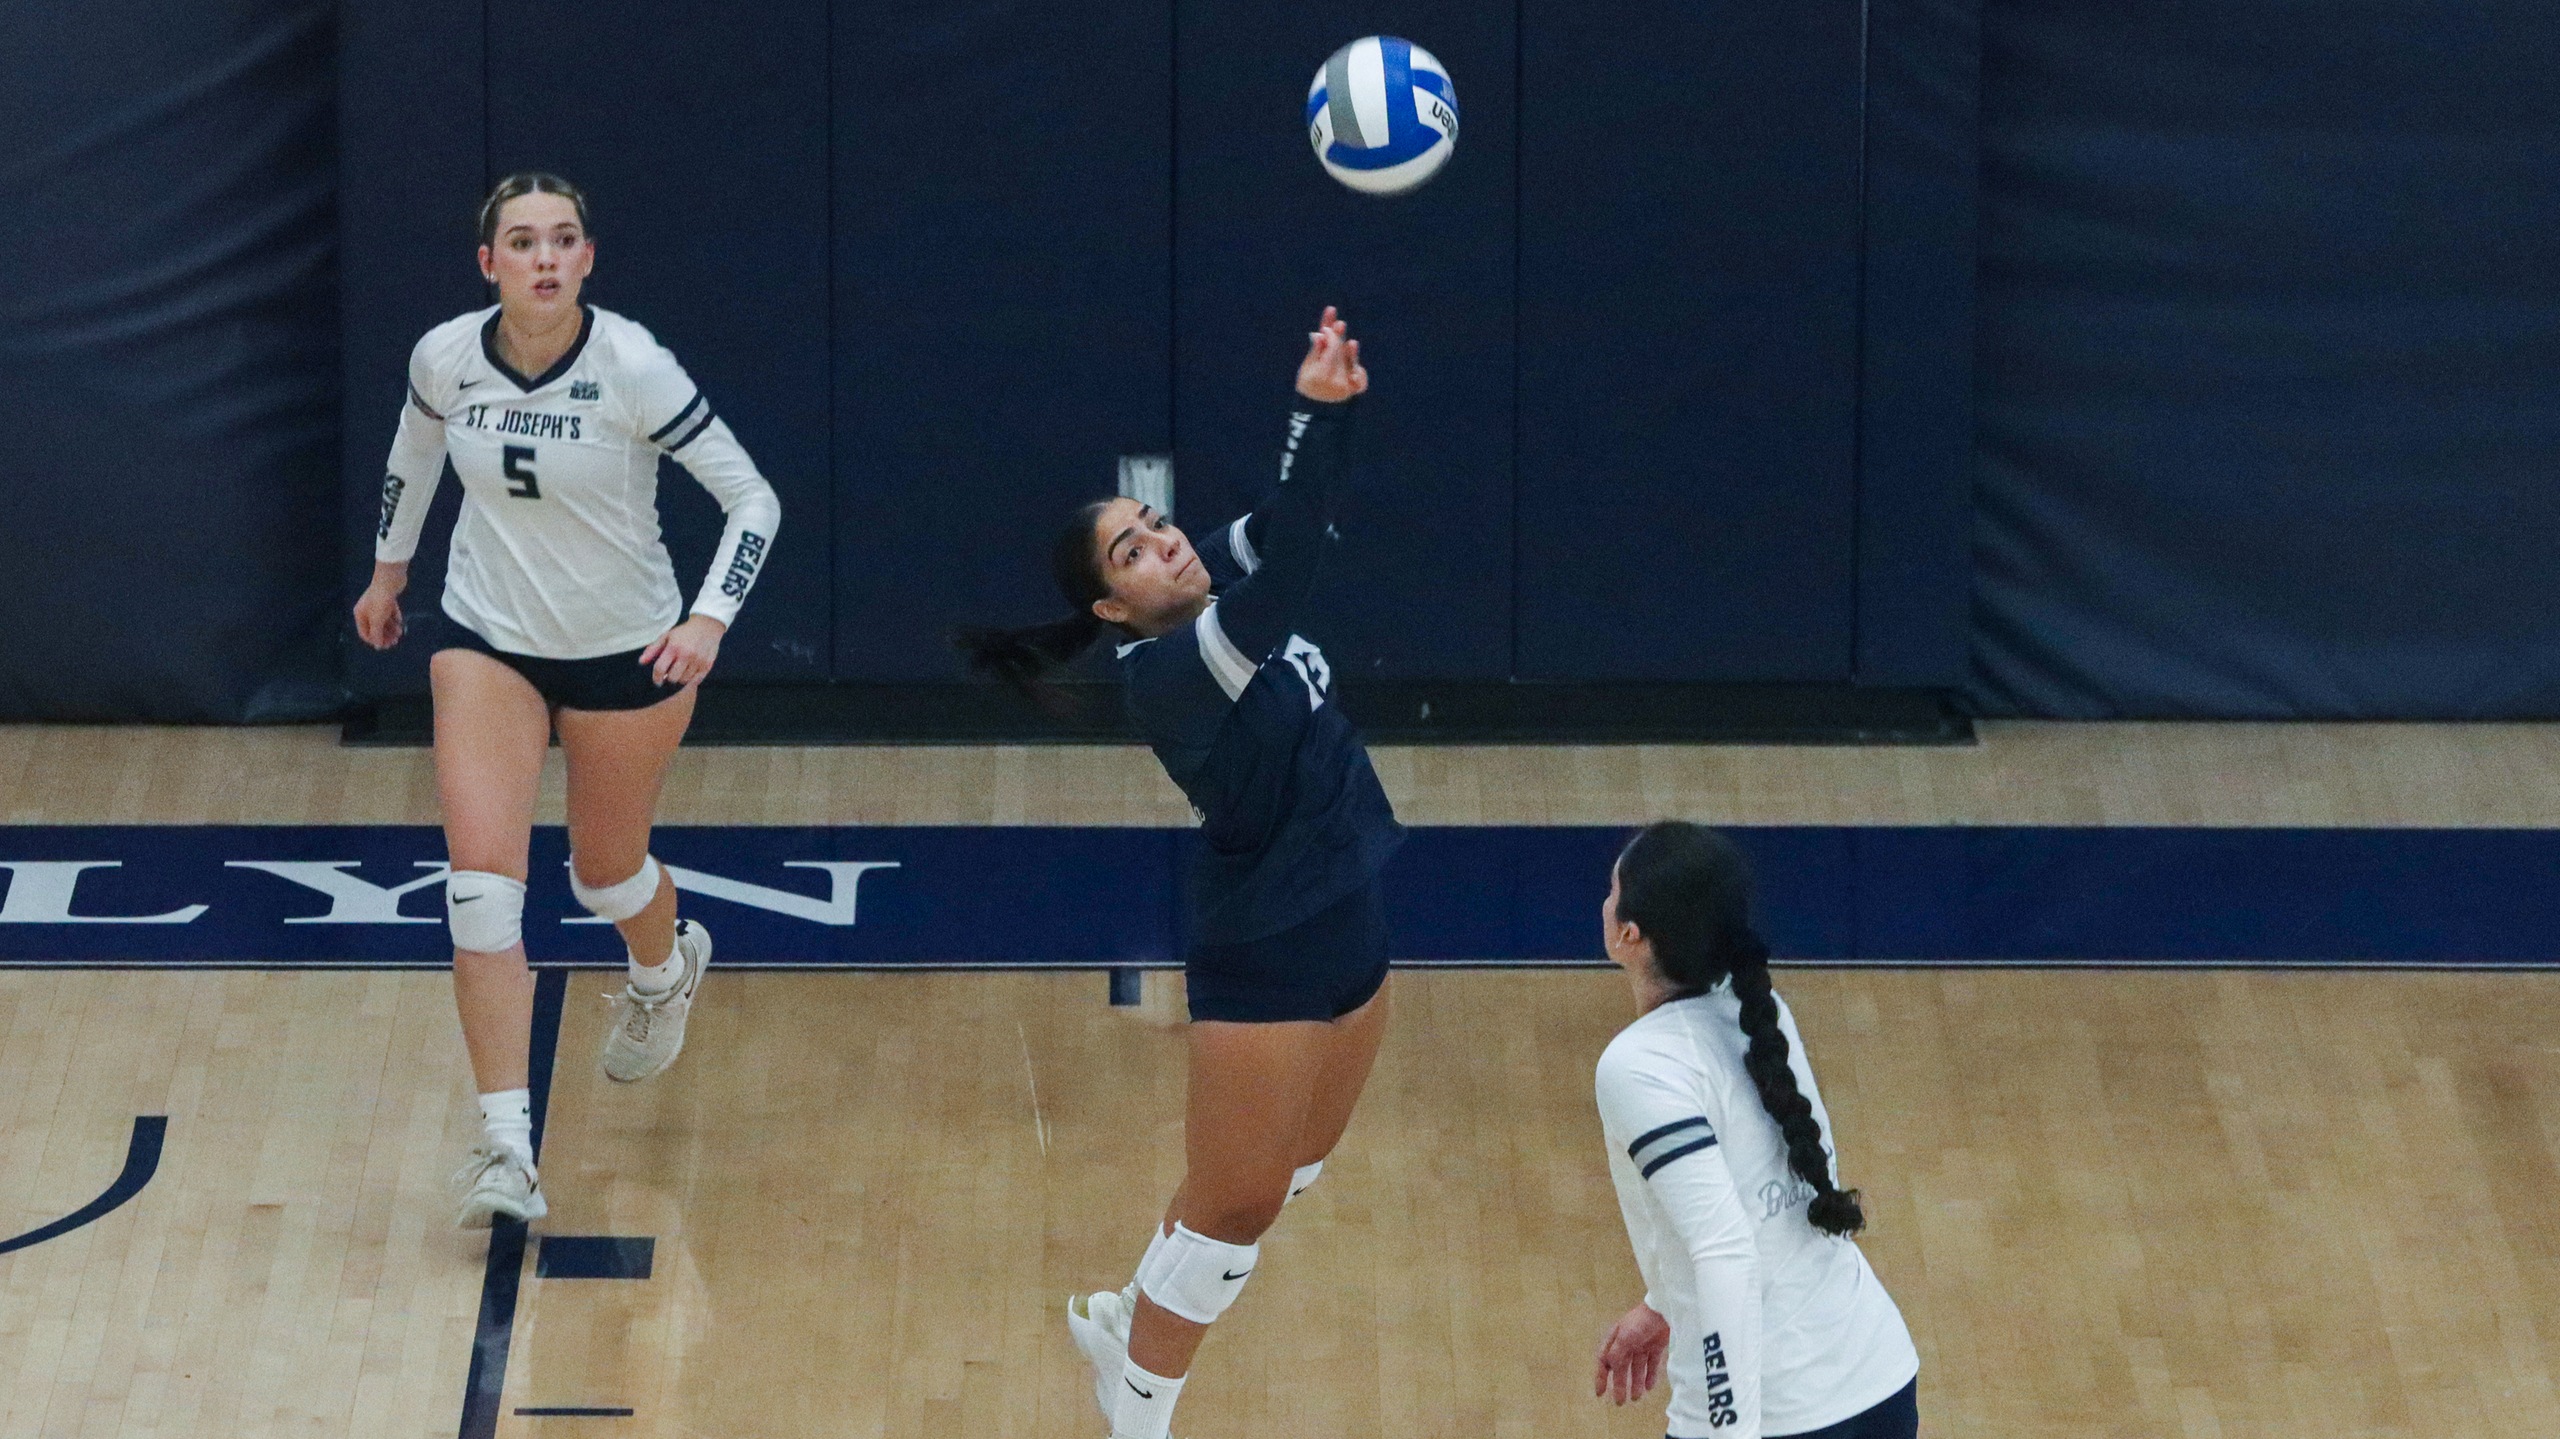 Women’s Volleyball Drops Hard-Fought Contest to Farmingdale State